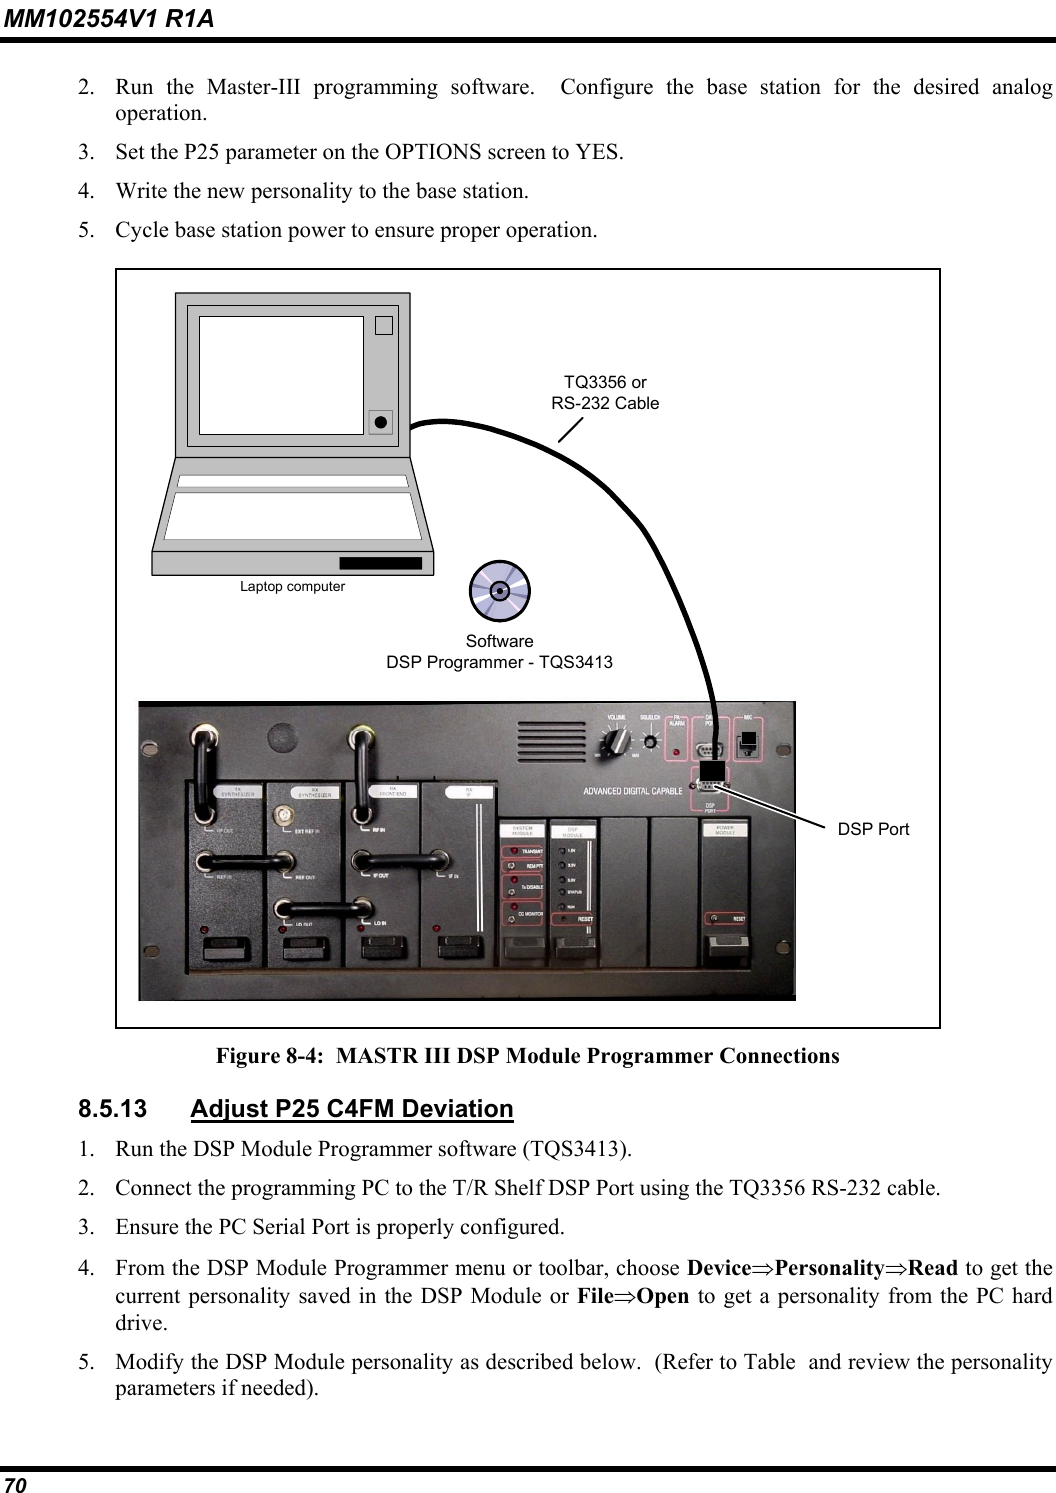 MM102554V1 R1A 70   2.  Run the Master-III programming software.  Configure the base station for the desired analog operation. 3.  Set the P25 parameter on the OPTIONS screen to YES. 4.  Write the new personality to the base station. 5.  Cycle base station power to ensure proper operation.  TQ3356 orRS-232 CableDSP PortLaptop computerSoftwareDSP Programmer - TQS3413 Figure 8-4:  MASTR III DSP Module Programmer Connections 8.5.13  Adjust P25 C4FM Deviation  1.  Run the DSP Module Programmer software (TQS3413). 2.  Connect the programming PC to the T/R Shelf DSP Port using the TQ3356 RS-232 cable. 3.  Ensure the PC Serial Port is properly configured. 4.  From the DSP Module Programmer menu or toolbar, choose Device⇒Personality⇒Read to get the current personality saved in the DSP Module or File⇒Open to get a personality from the PC hard drive. 5.  Modify the DSP Module personality as described below.  (Refer to Table  and review the personality parameters if needed). 